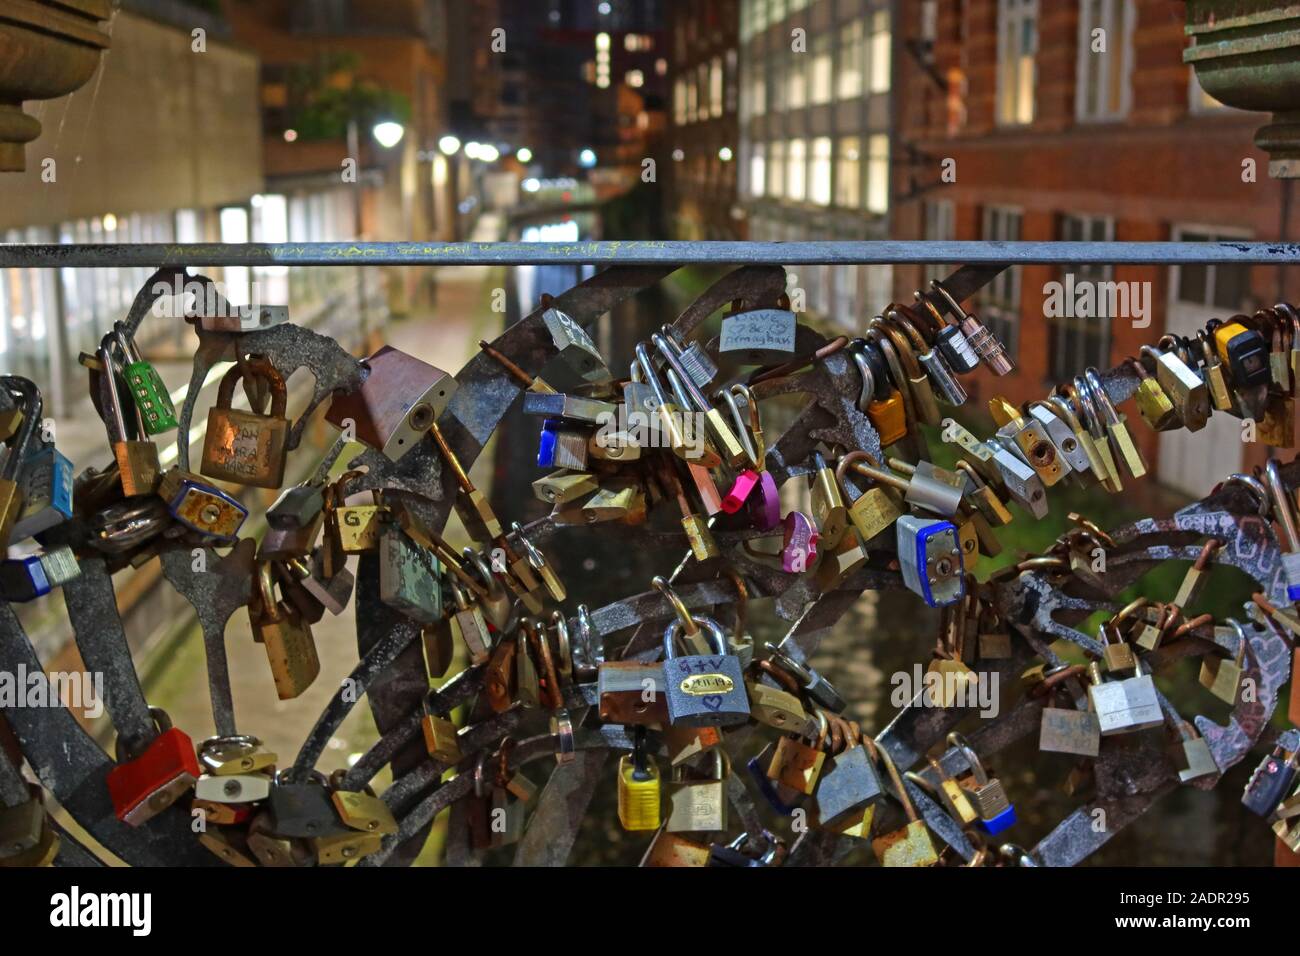 Manchester Love Locks at night,Oxford Road,bridge over canal,Manchester city centre, North West,England, UK Stock Photo